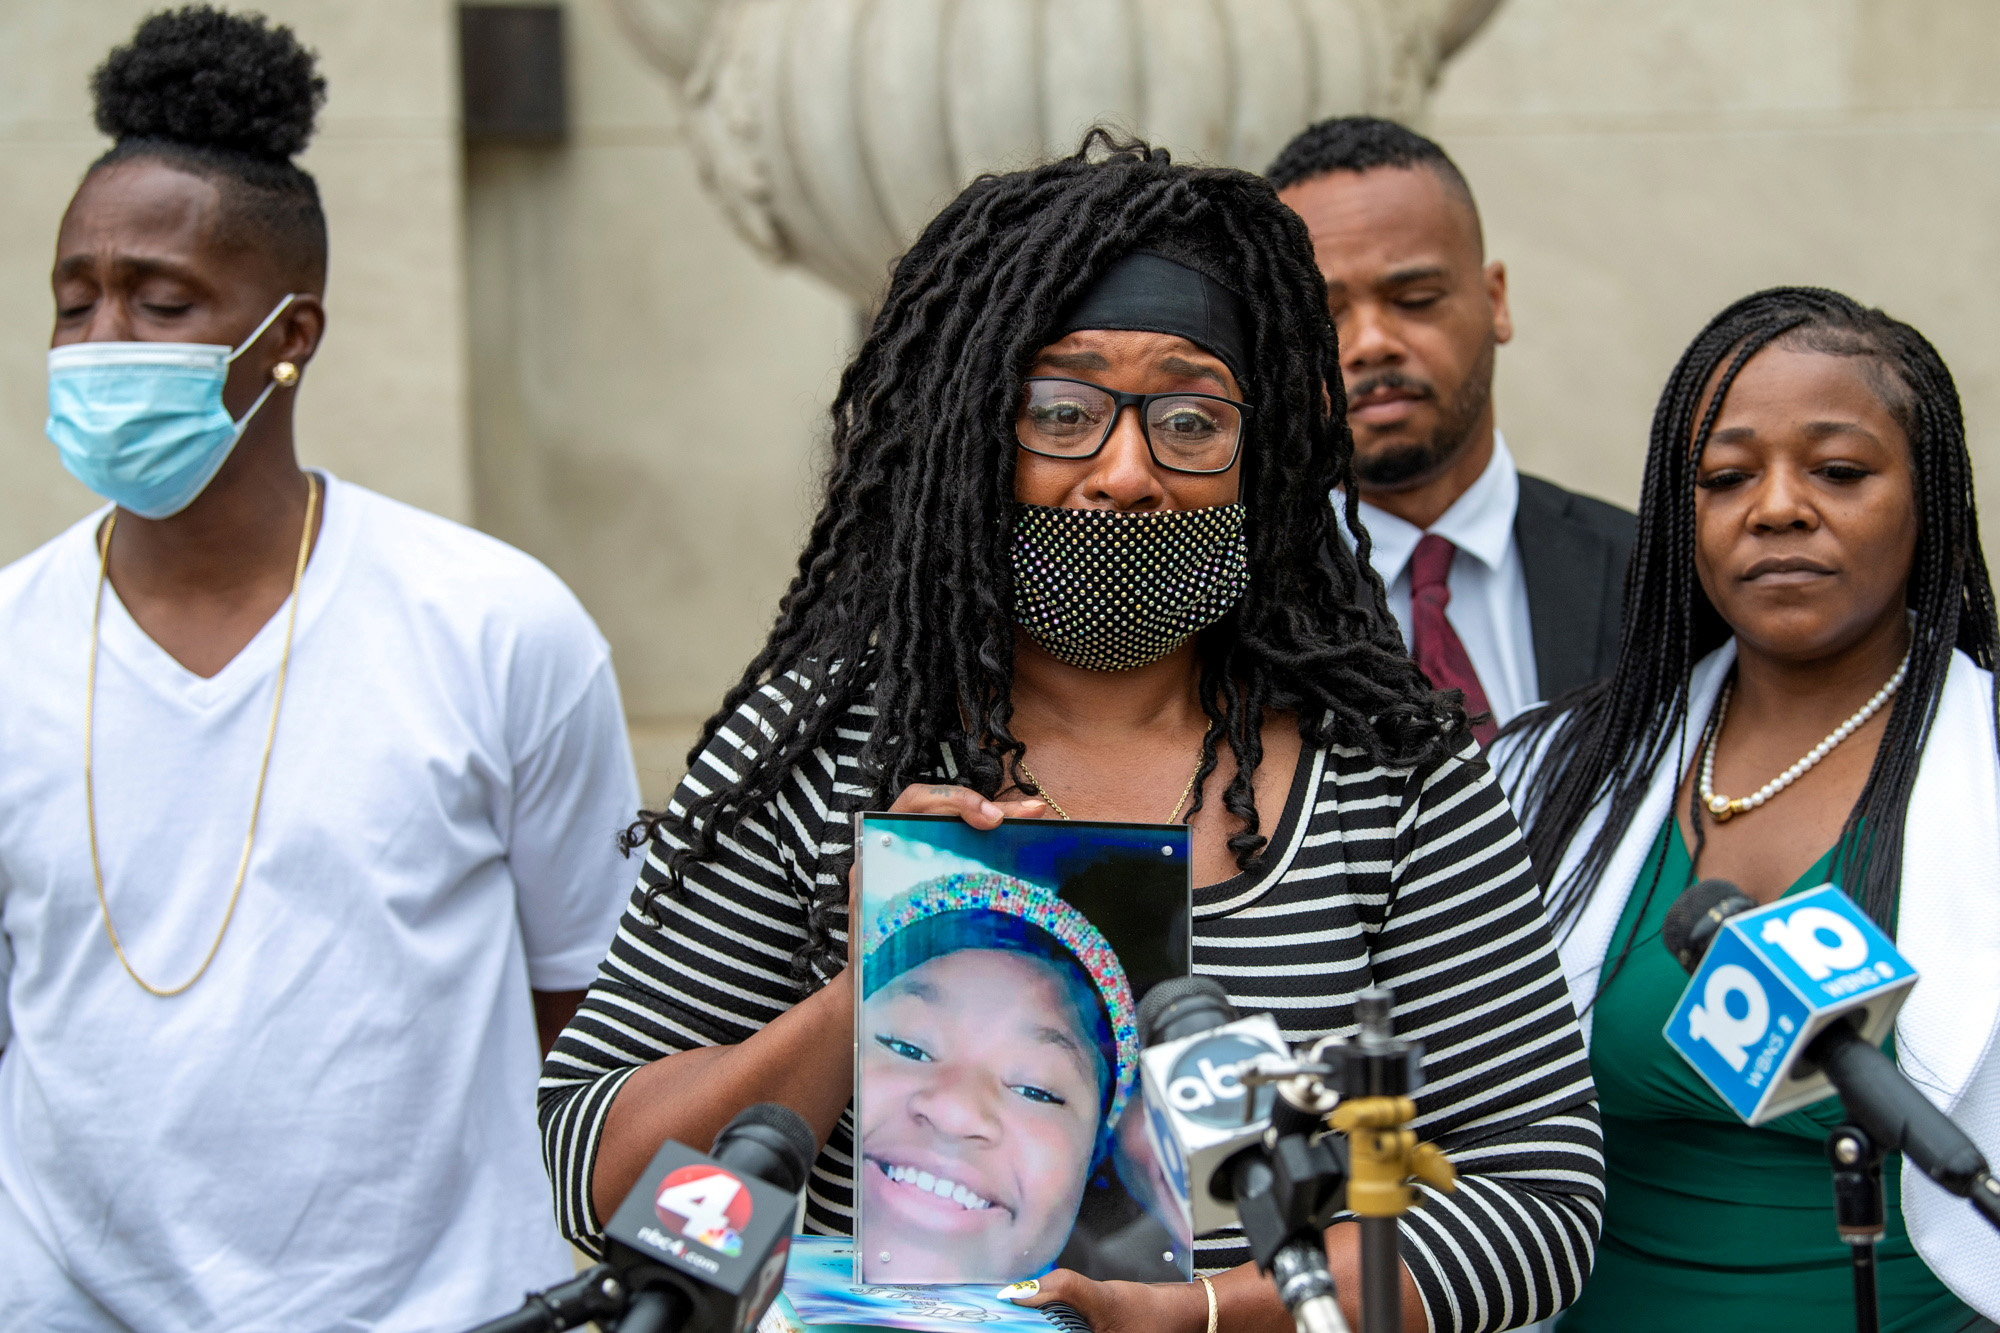 PHOTO: Paula Bryant, Ma'Khia Bryant's mother, speaks to media alongside other members of the Bryant family and their attorney, Michelle Martin, during a news conference in front of City Hall in Columbus, Ohio, April 28, 2021. 